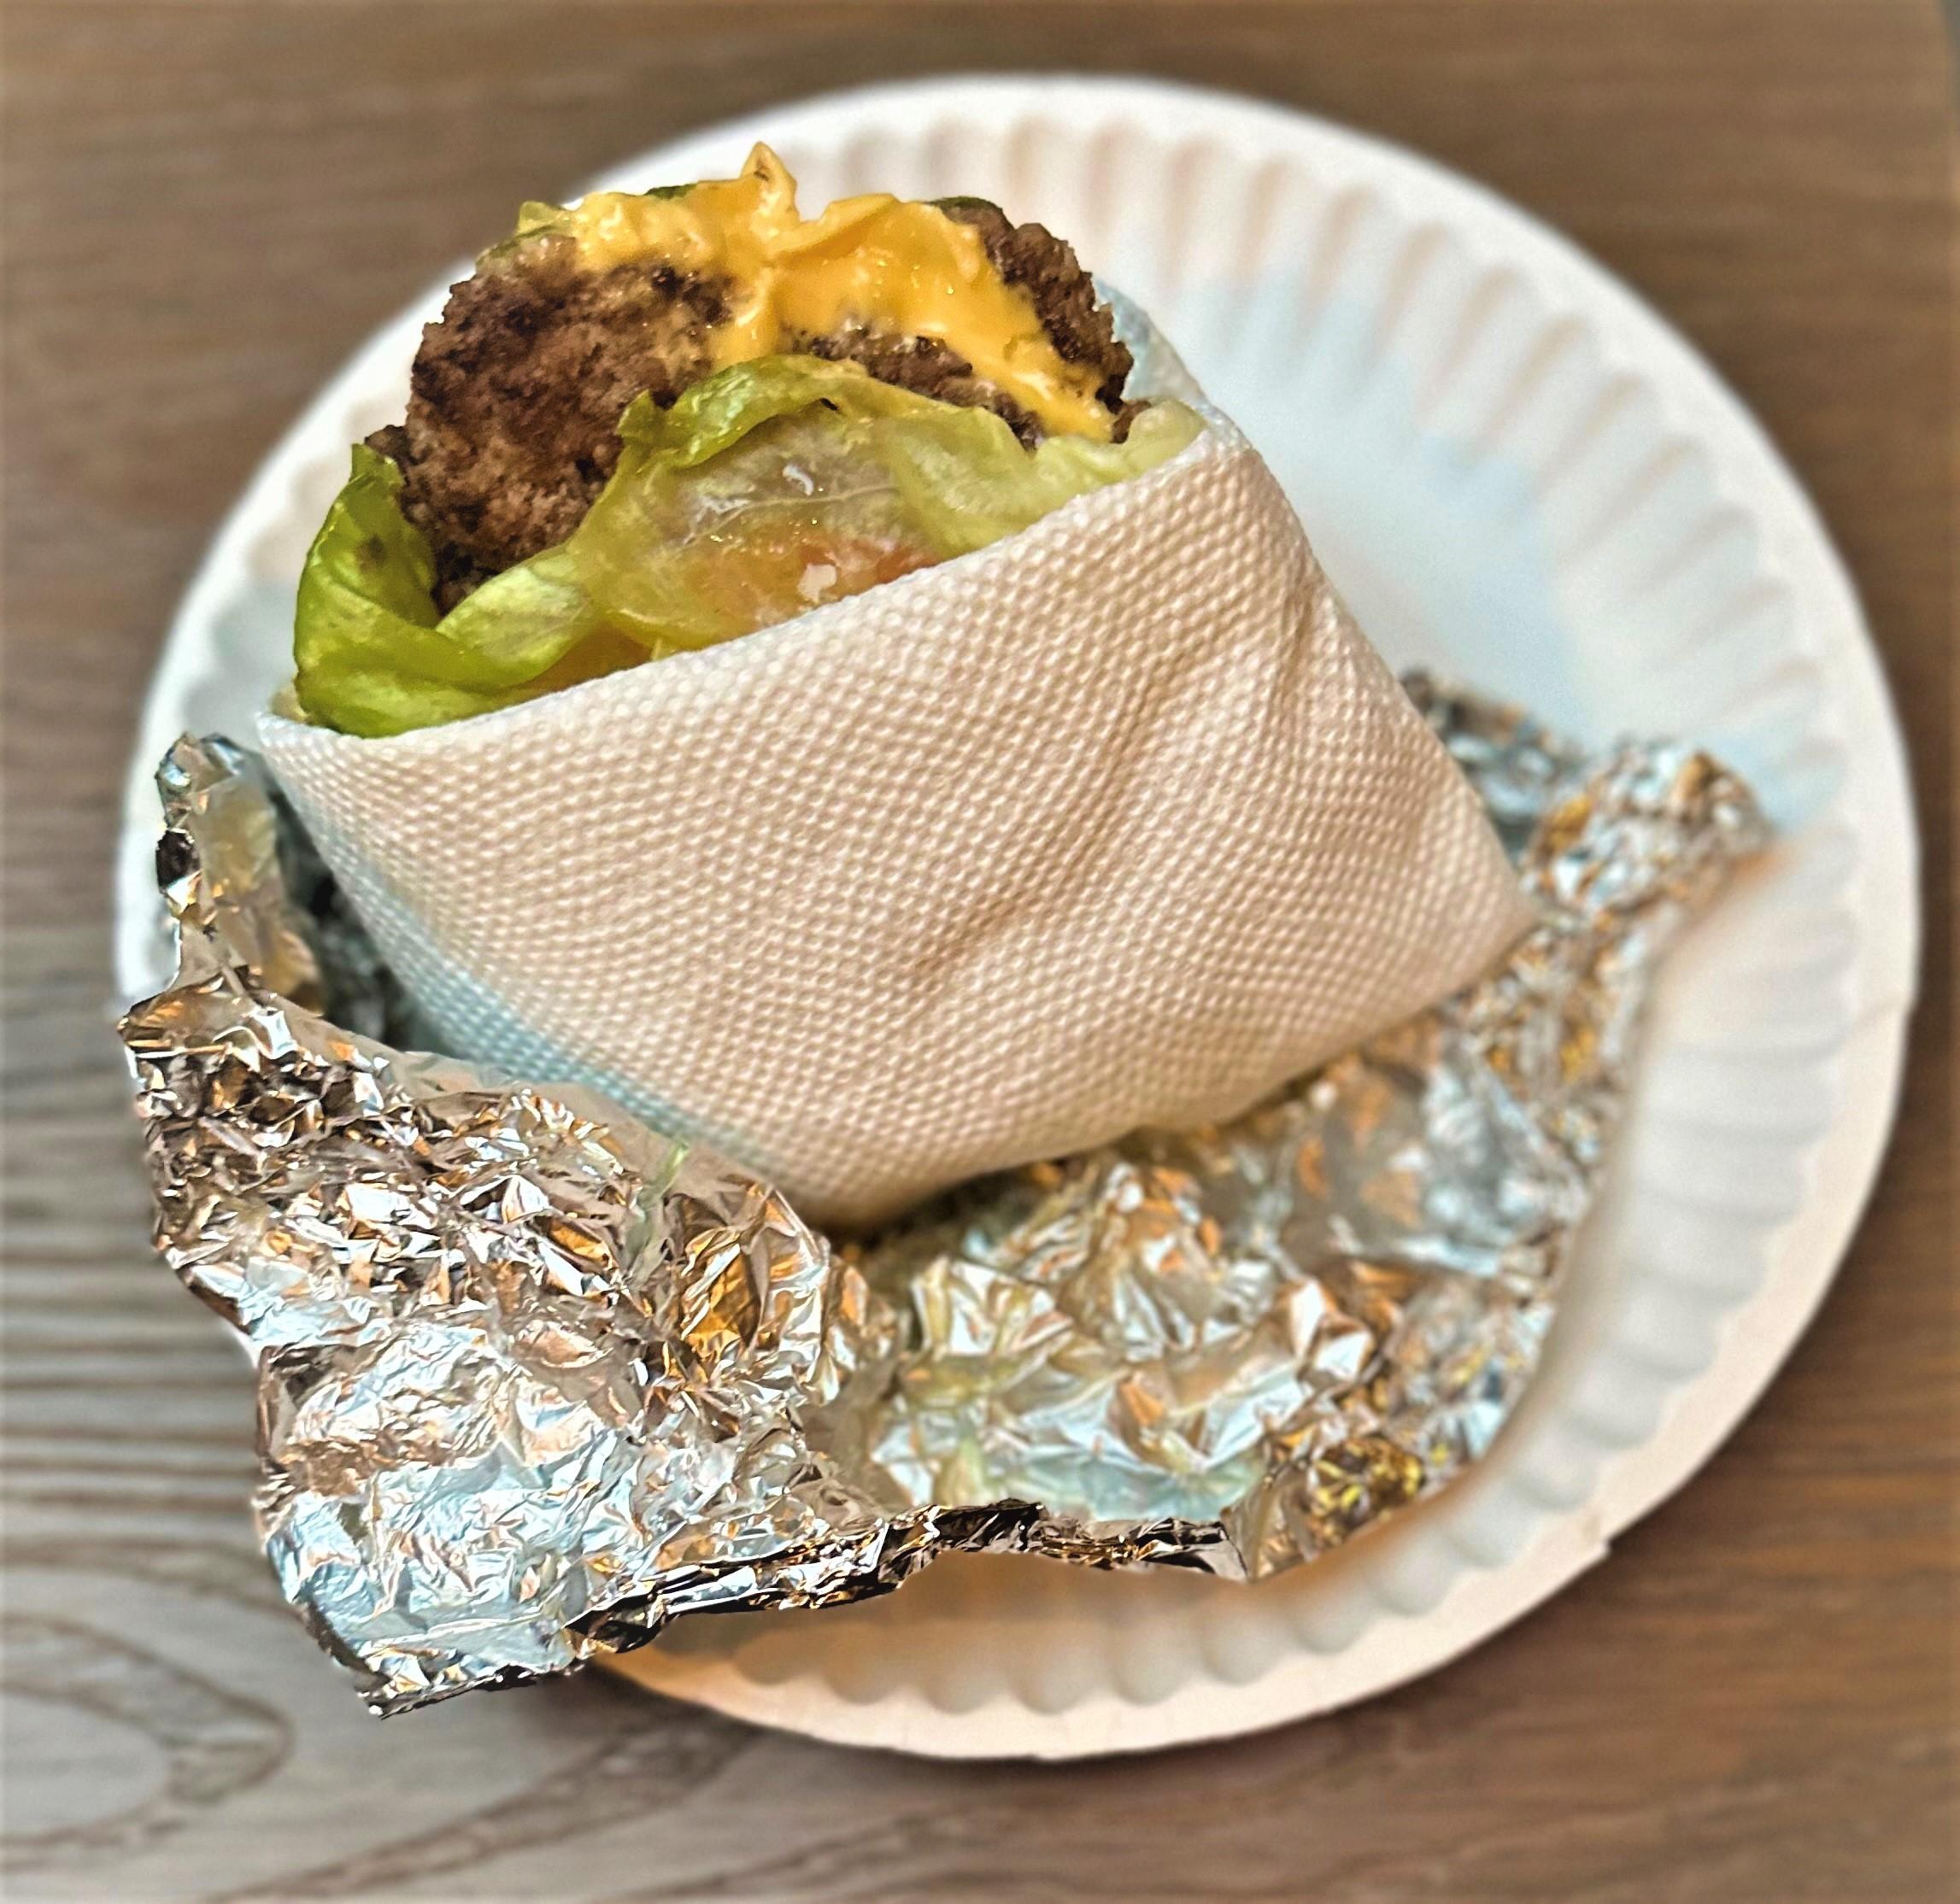 Five Guys' Lettuce-Wrapped Double CheeseBurger